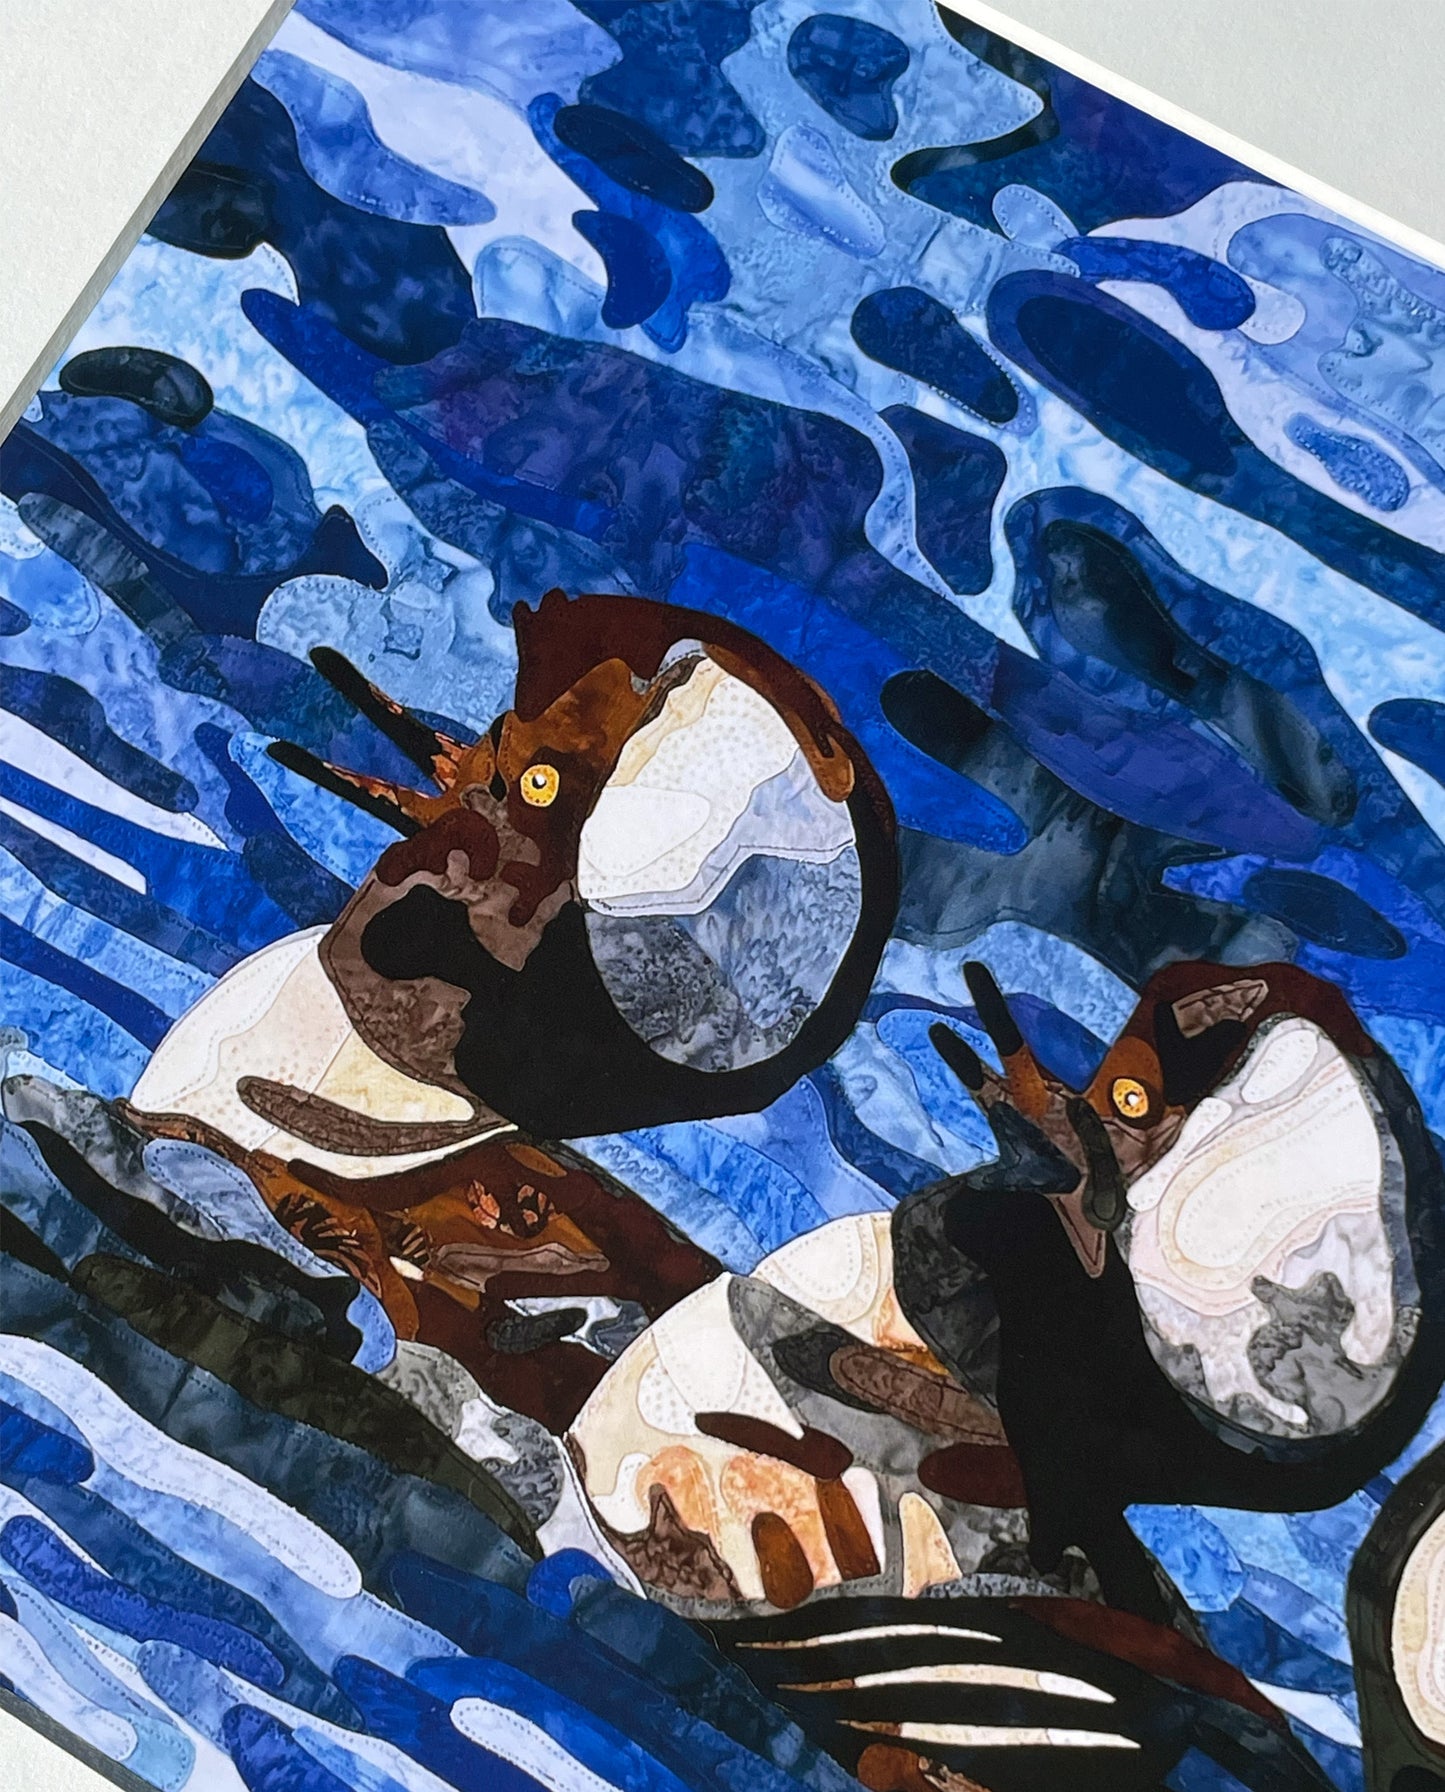 Fabric Collage Print - Hooded Mergansers